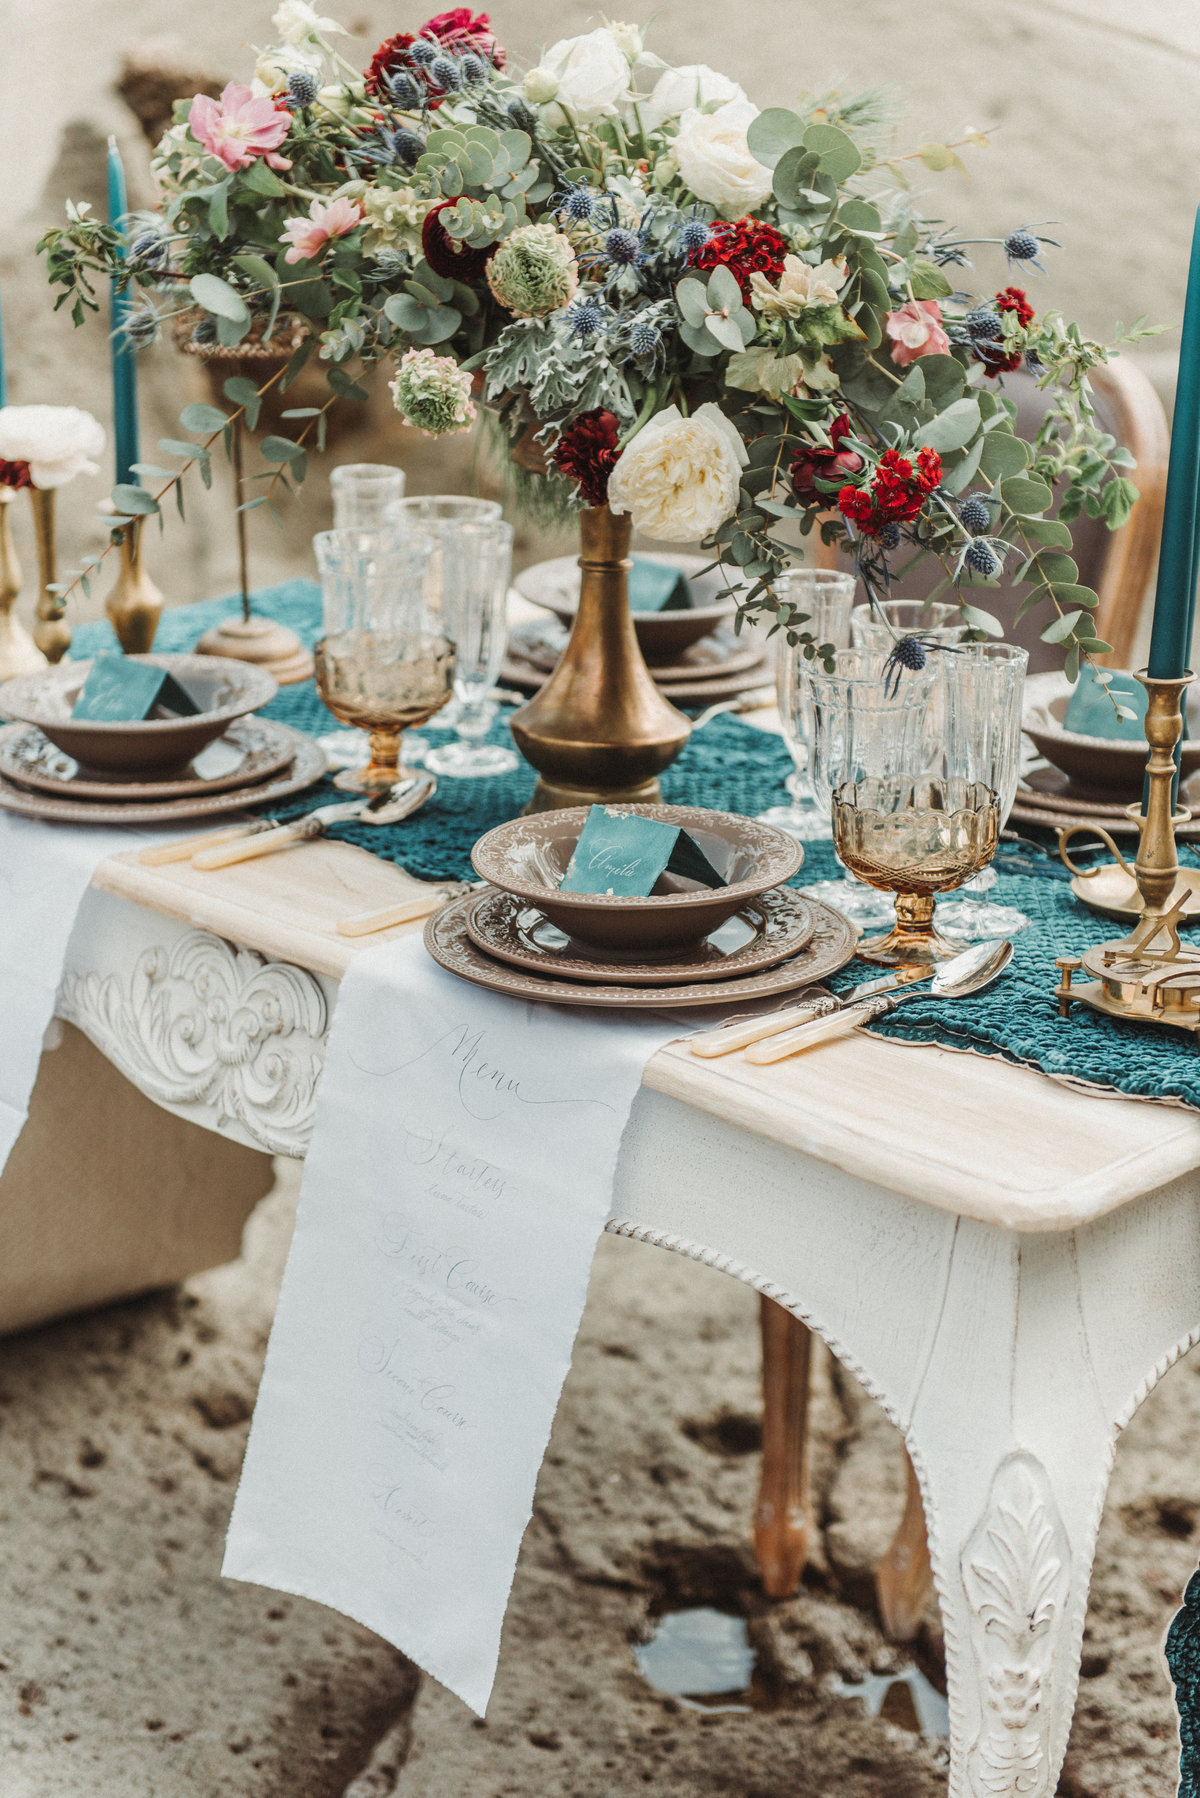 A delabré-marine wedding style with a natural and ancient precious character